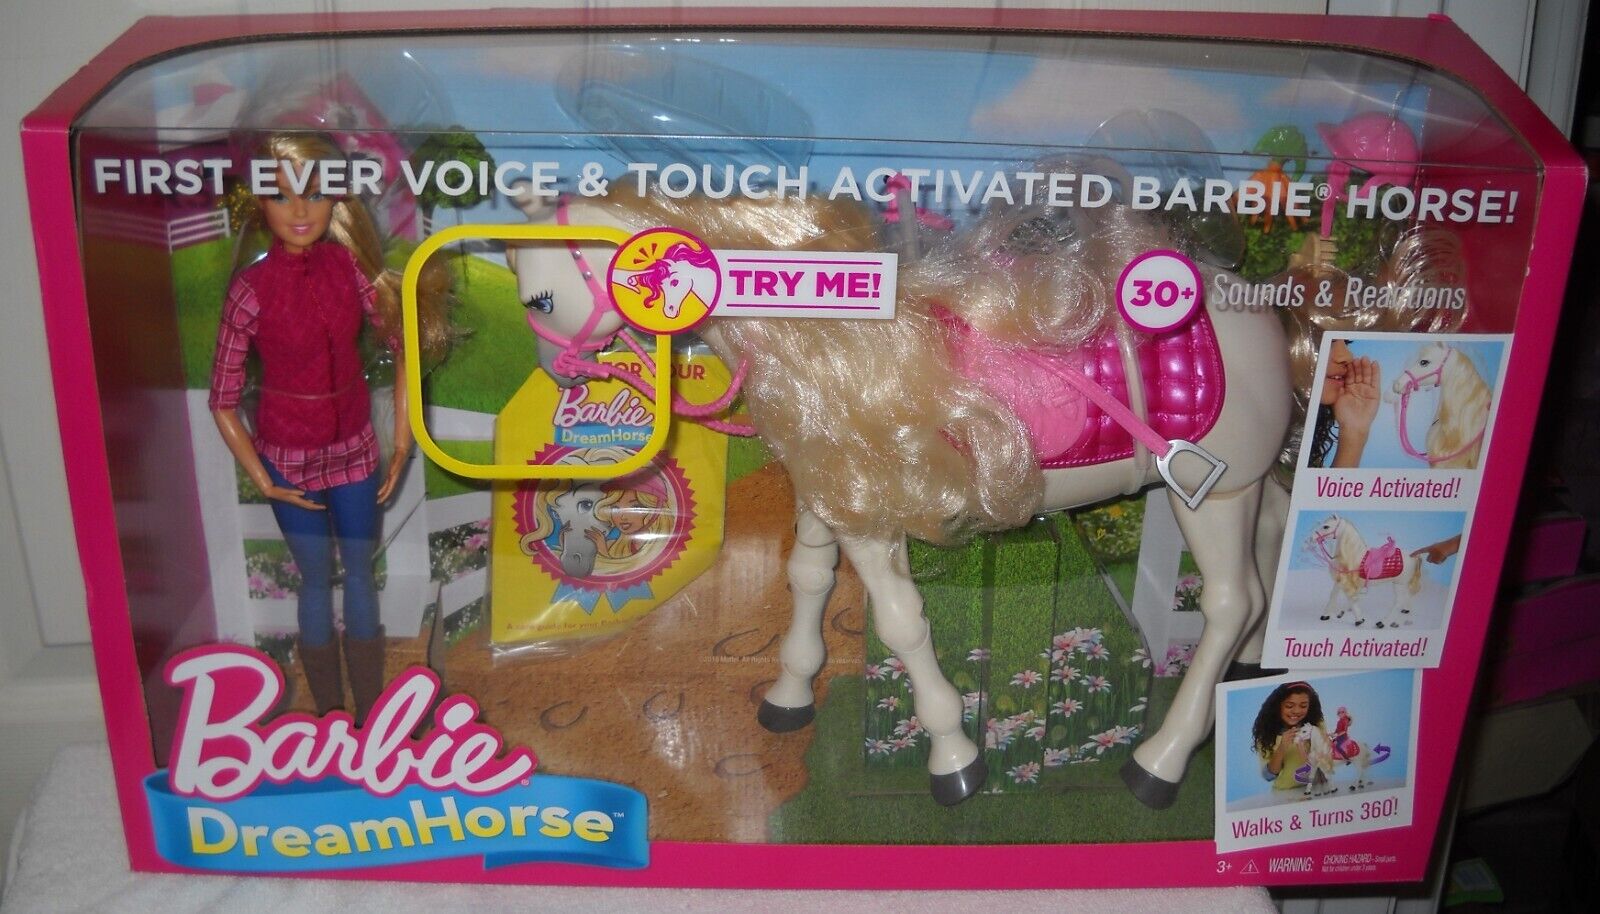 11938 RARE Mattel 2017 Dreamhorse Voice Activated with Barbie Doll | eBay